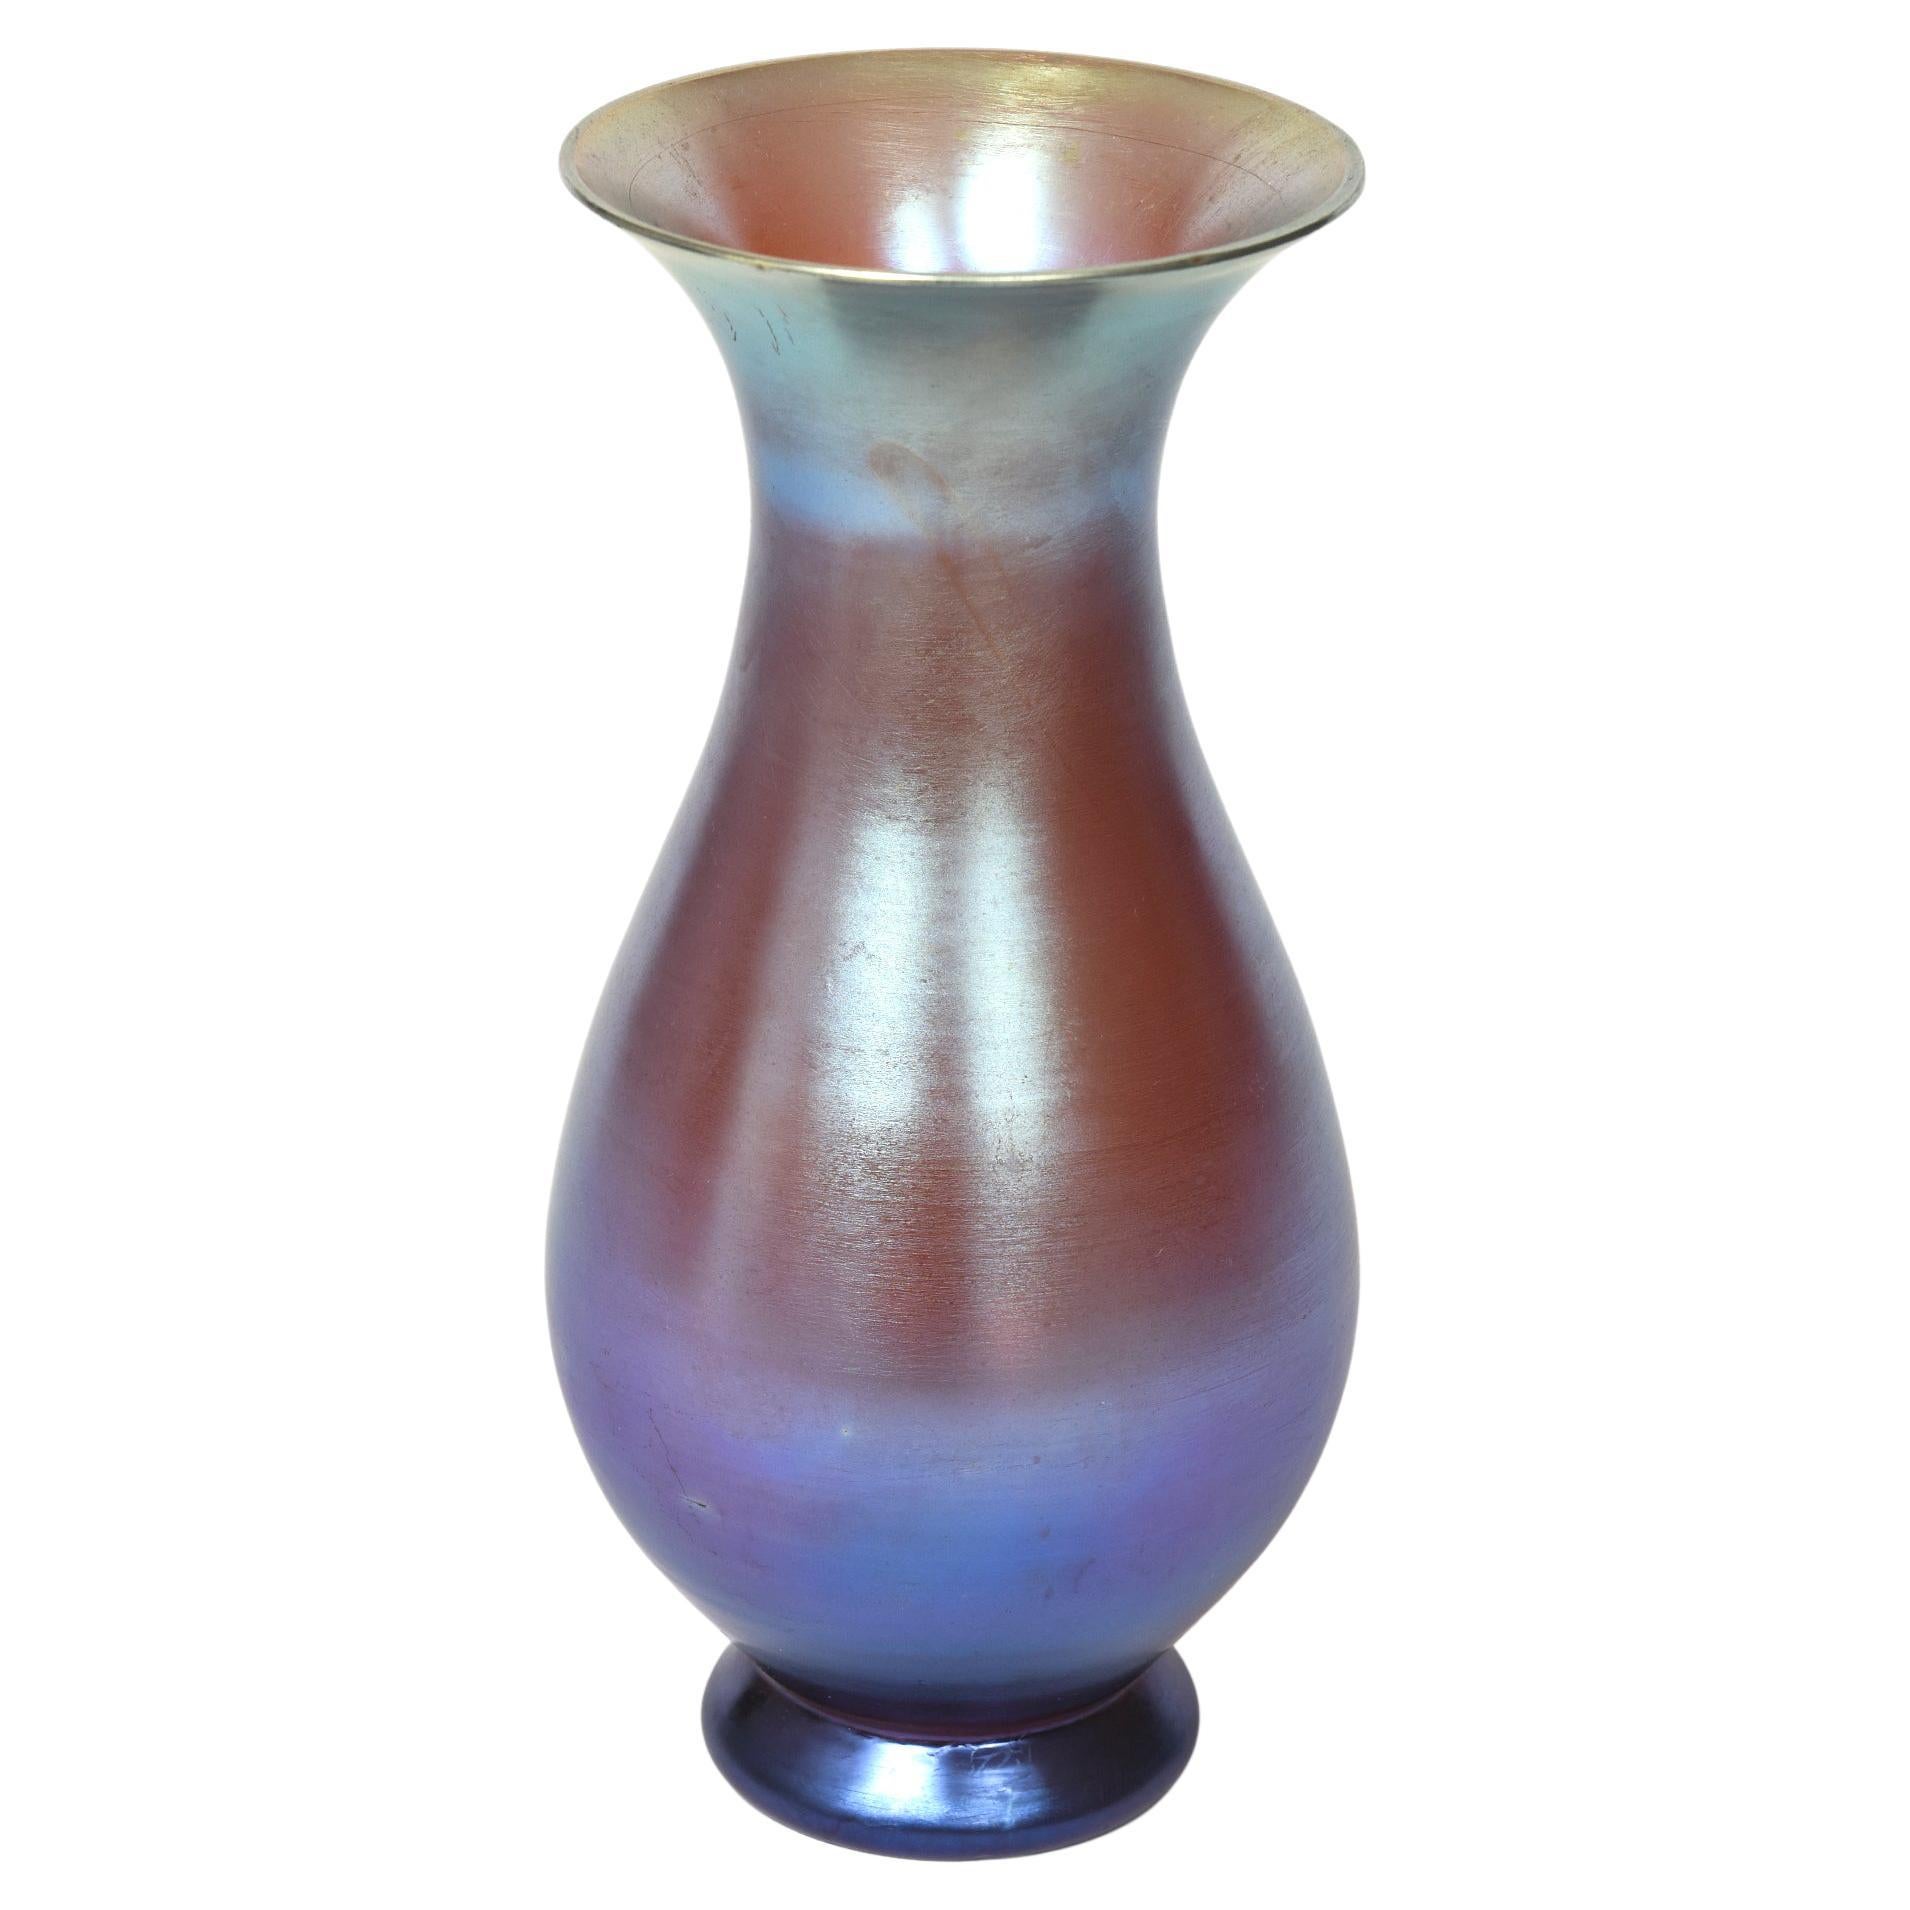 Beautiful iridescent Art Deco vase attributed to WMF from the 1930s

Biography from the Glass Museum:

Although WMF produced glass for more then 100 years, their period of triumph in glass only lasted from 1926 to 1936. WMF, or the